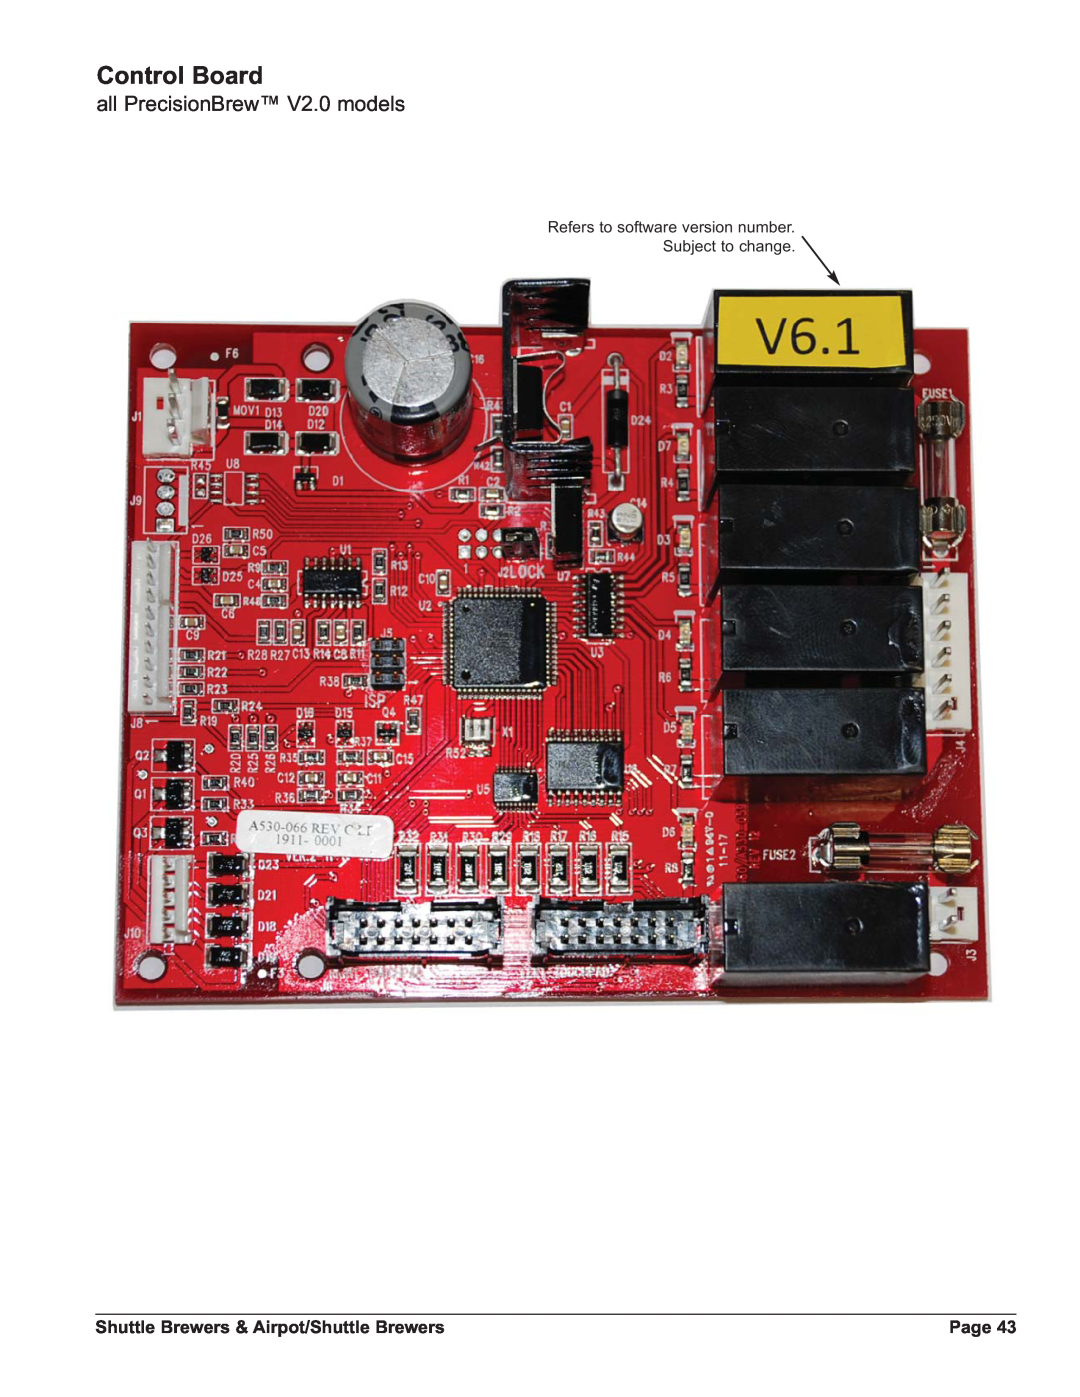 Grindmaster APBVSA-430V2E230 Control Board, all PrecisionBrew V2.0 models, Shuttle Brewers & Airpot/Shuttle Brewers, Page 